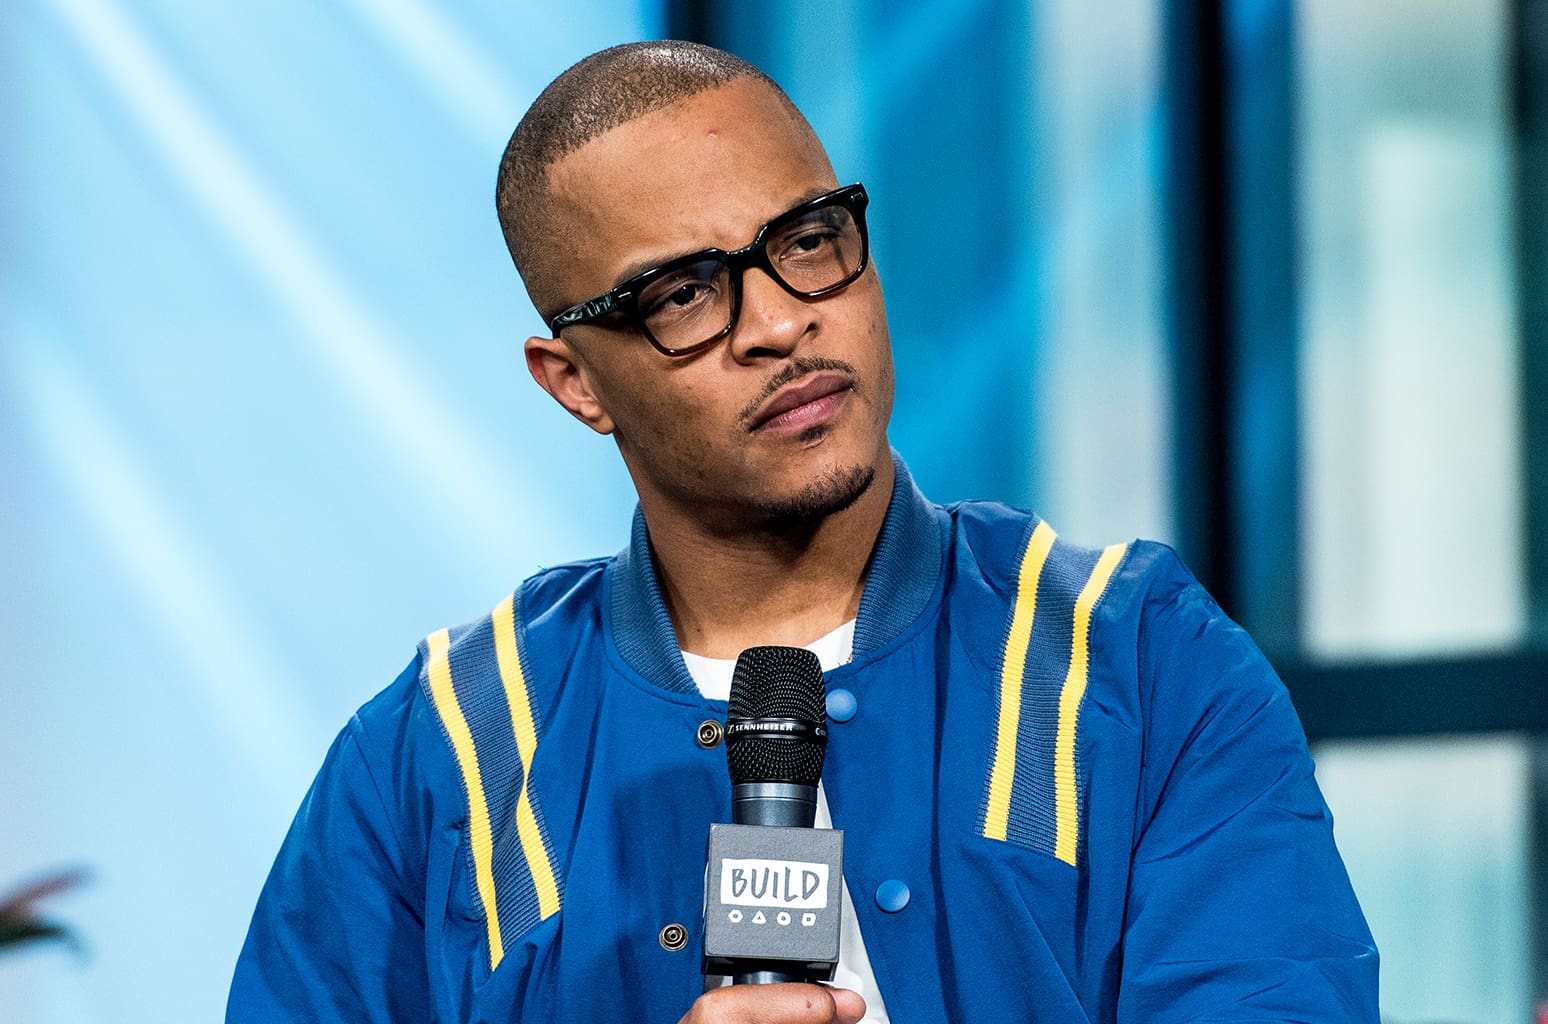 T.I. Poses With His Doppelgänger - Check Out His Latest Photo